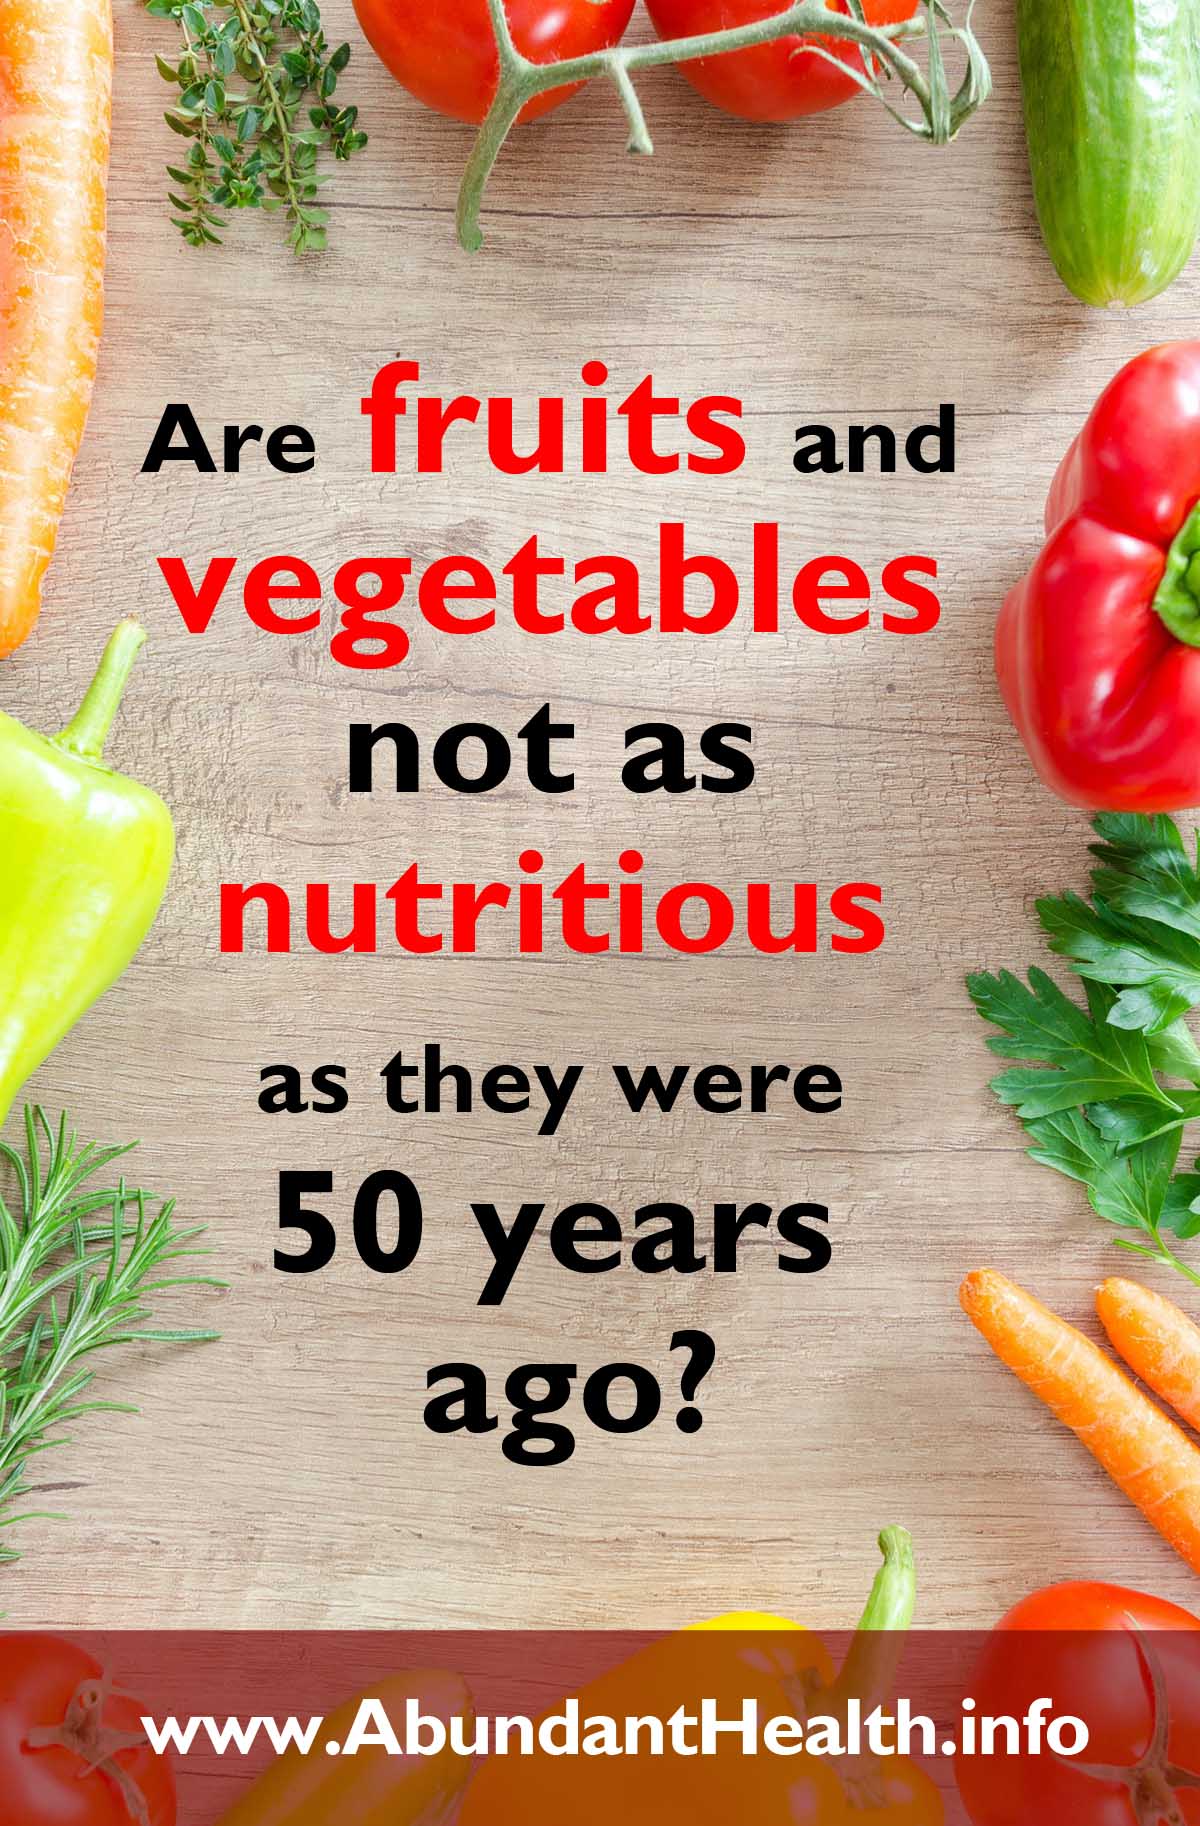 Are Fruits and Vegetables not as Nutritious as they Were 50 Years Ago?